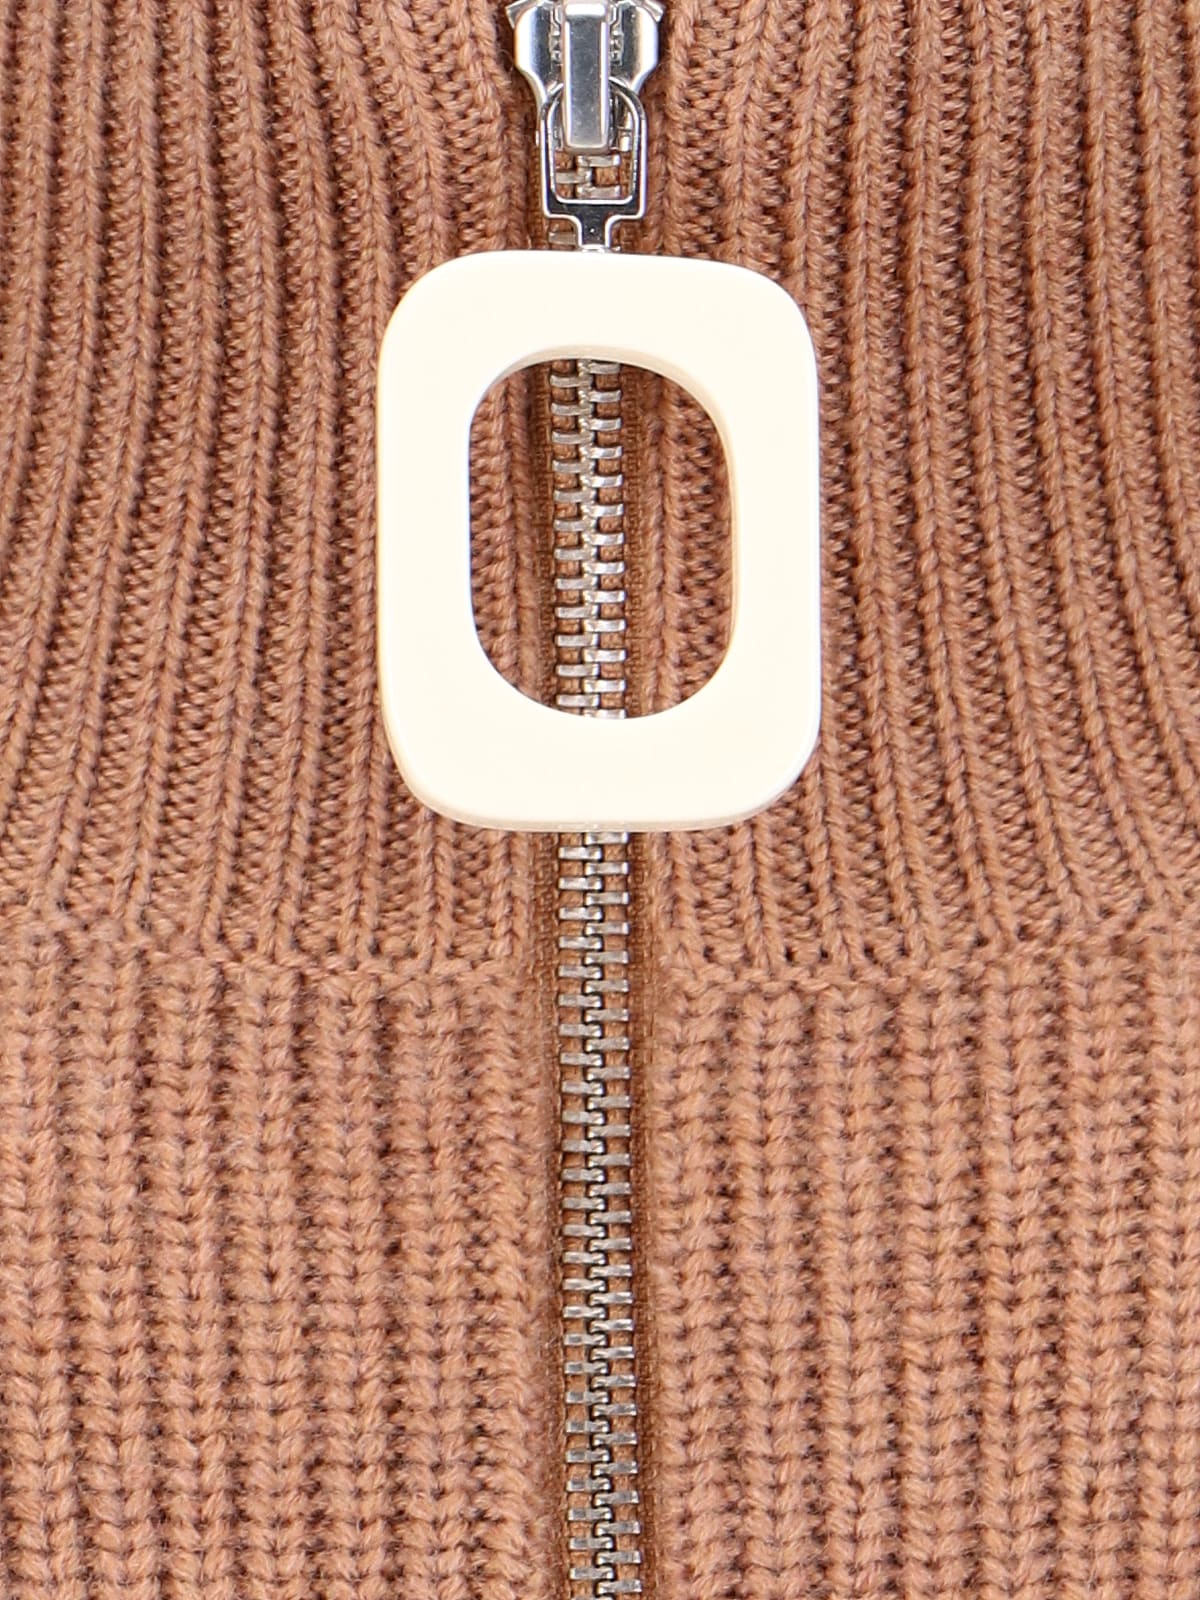 Shop Jw Anderson High Neck Sweater In Brown